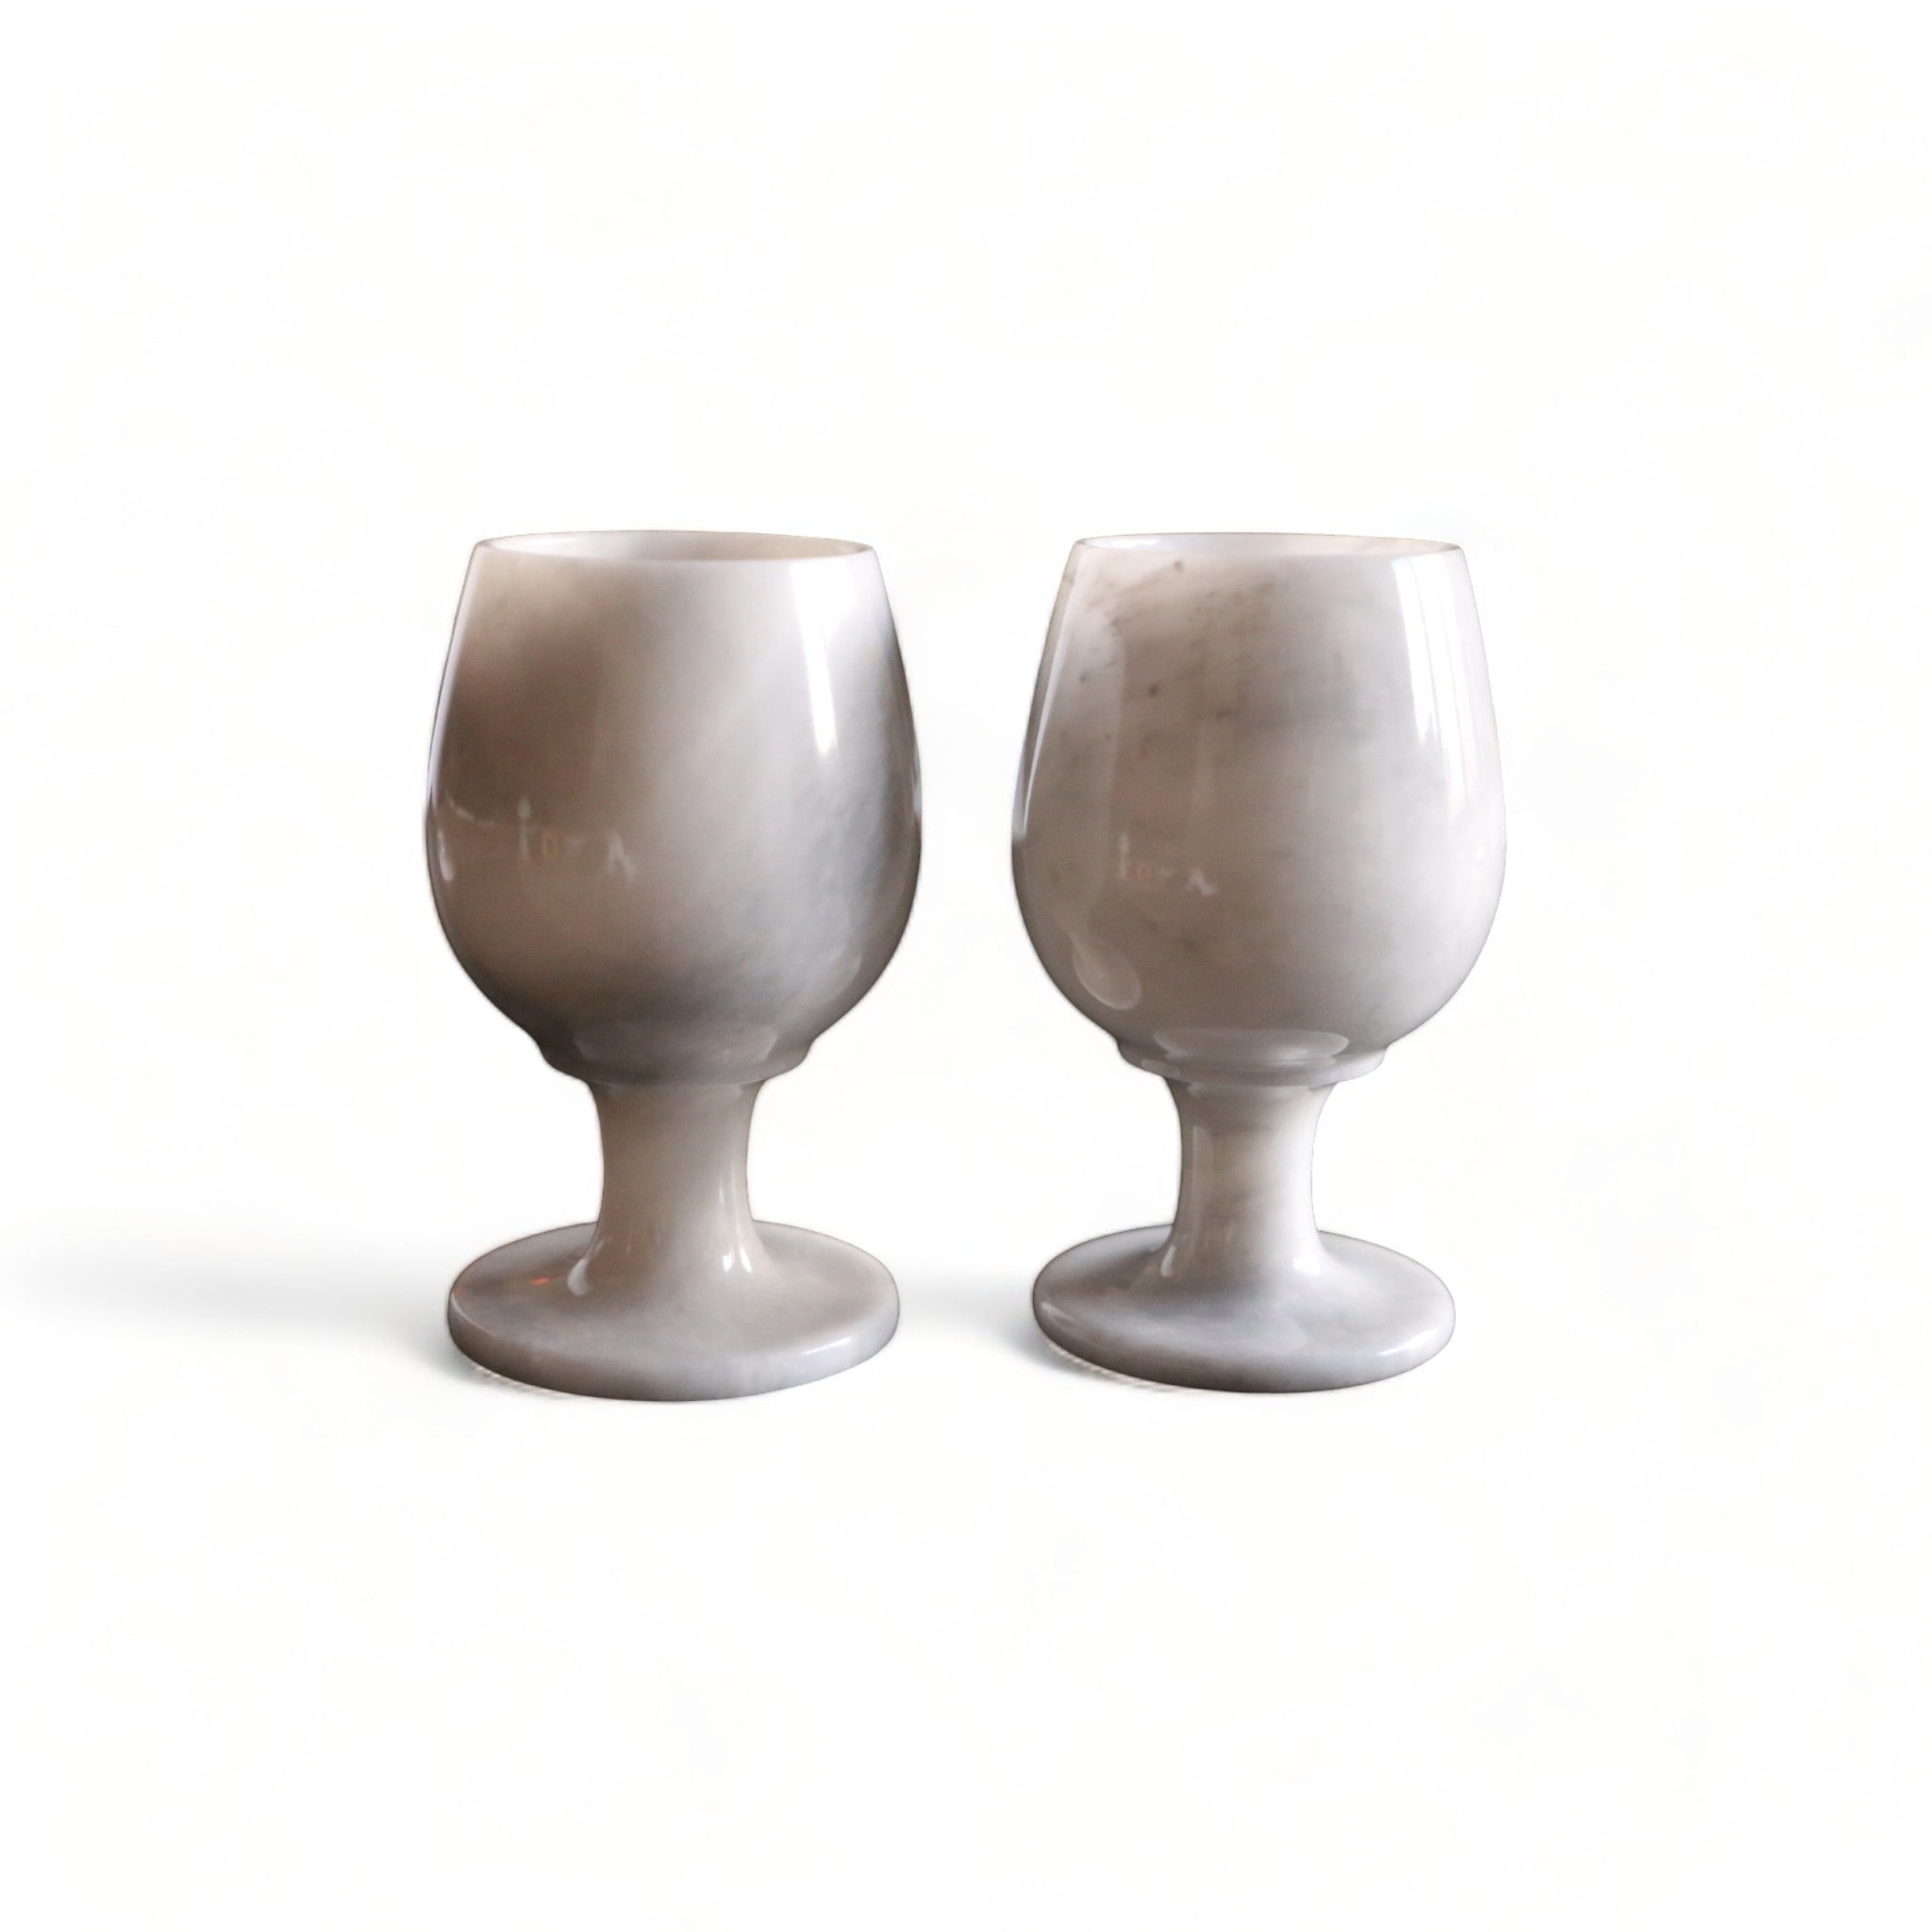 Elegant White Marble Goblet Set of 2 - Luxurious Home Accent